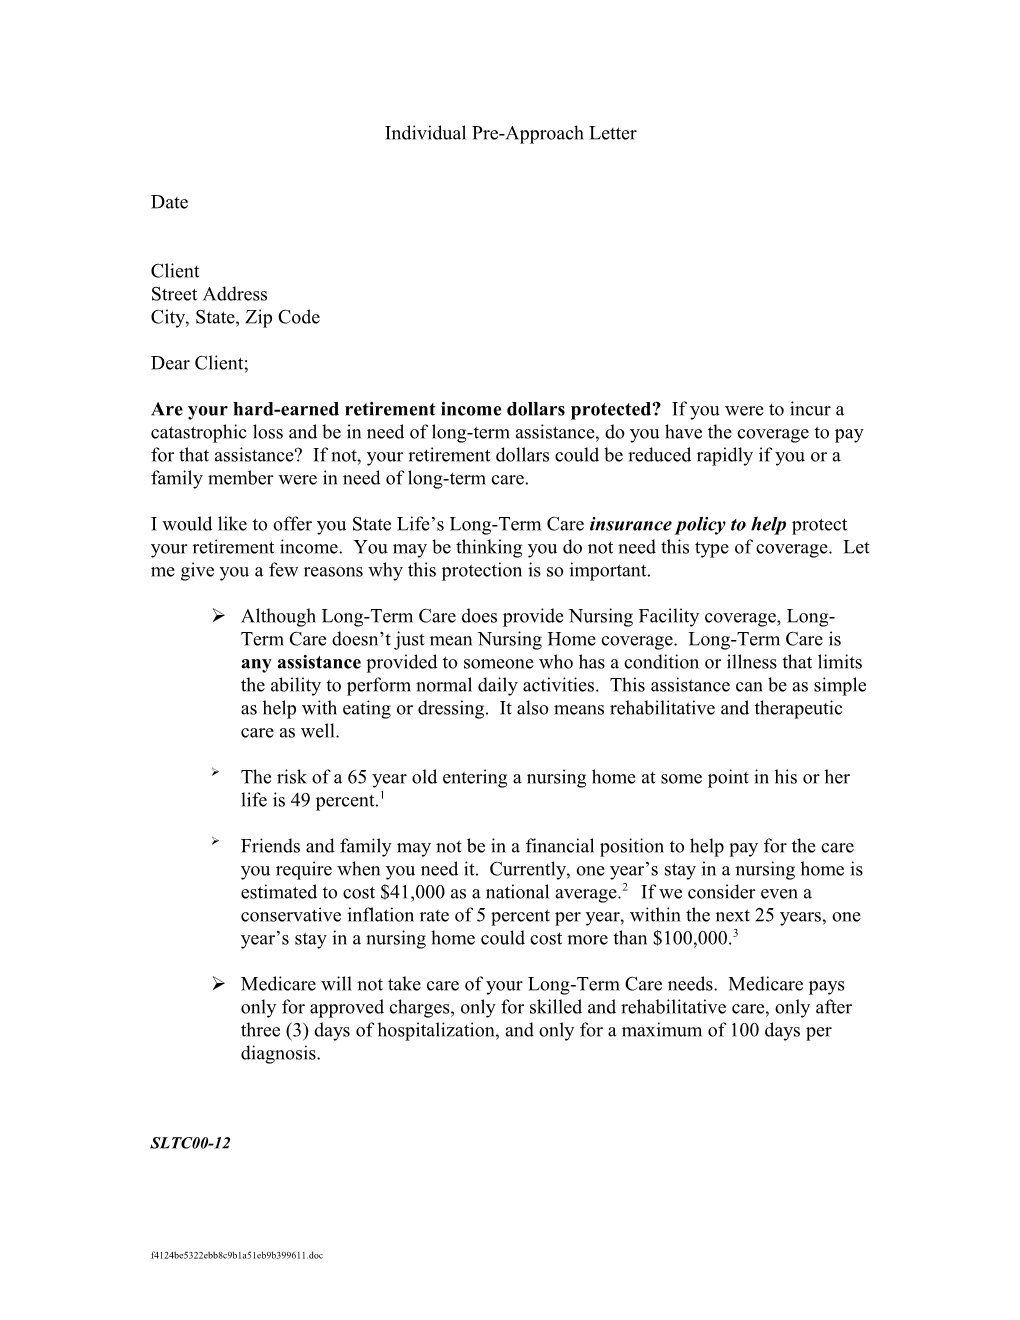 Individual Pre-Approach Letter